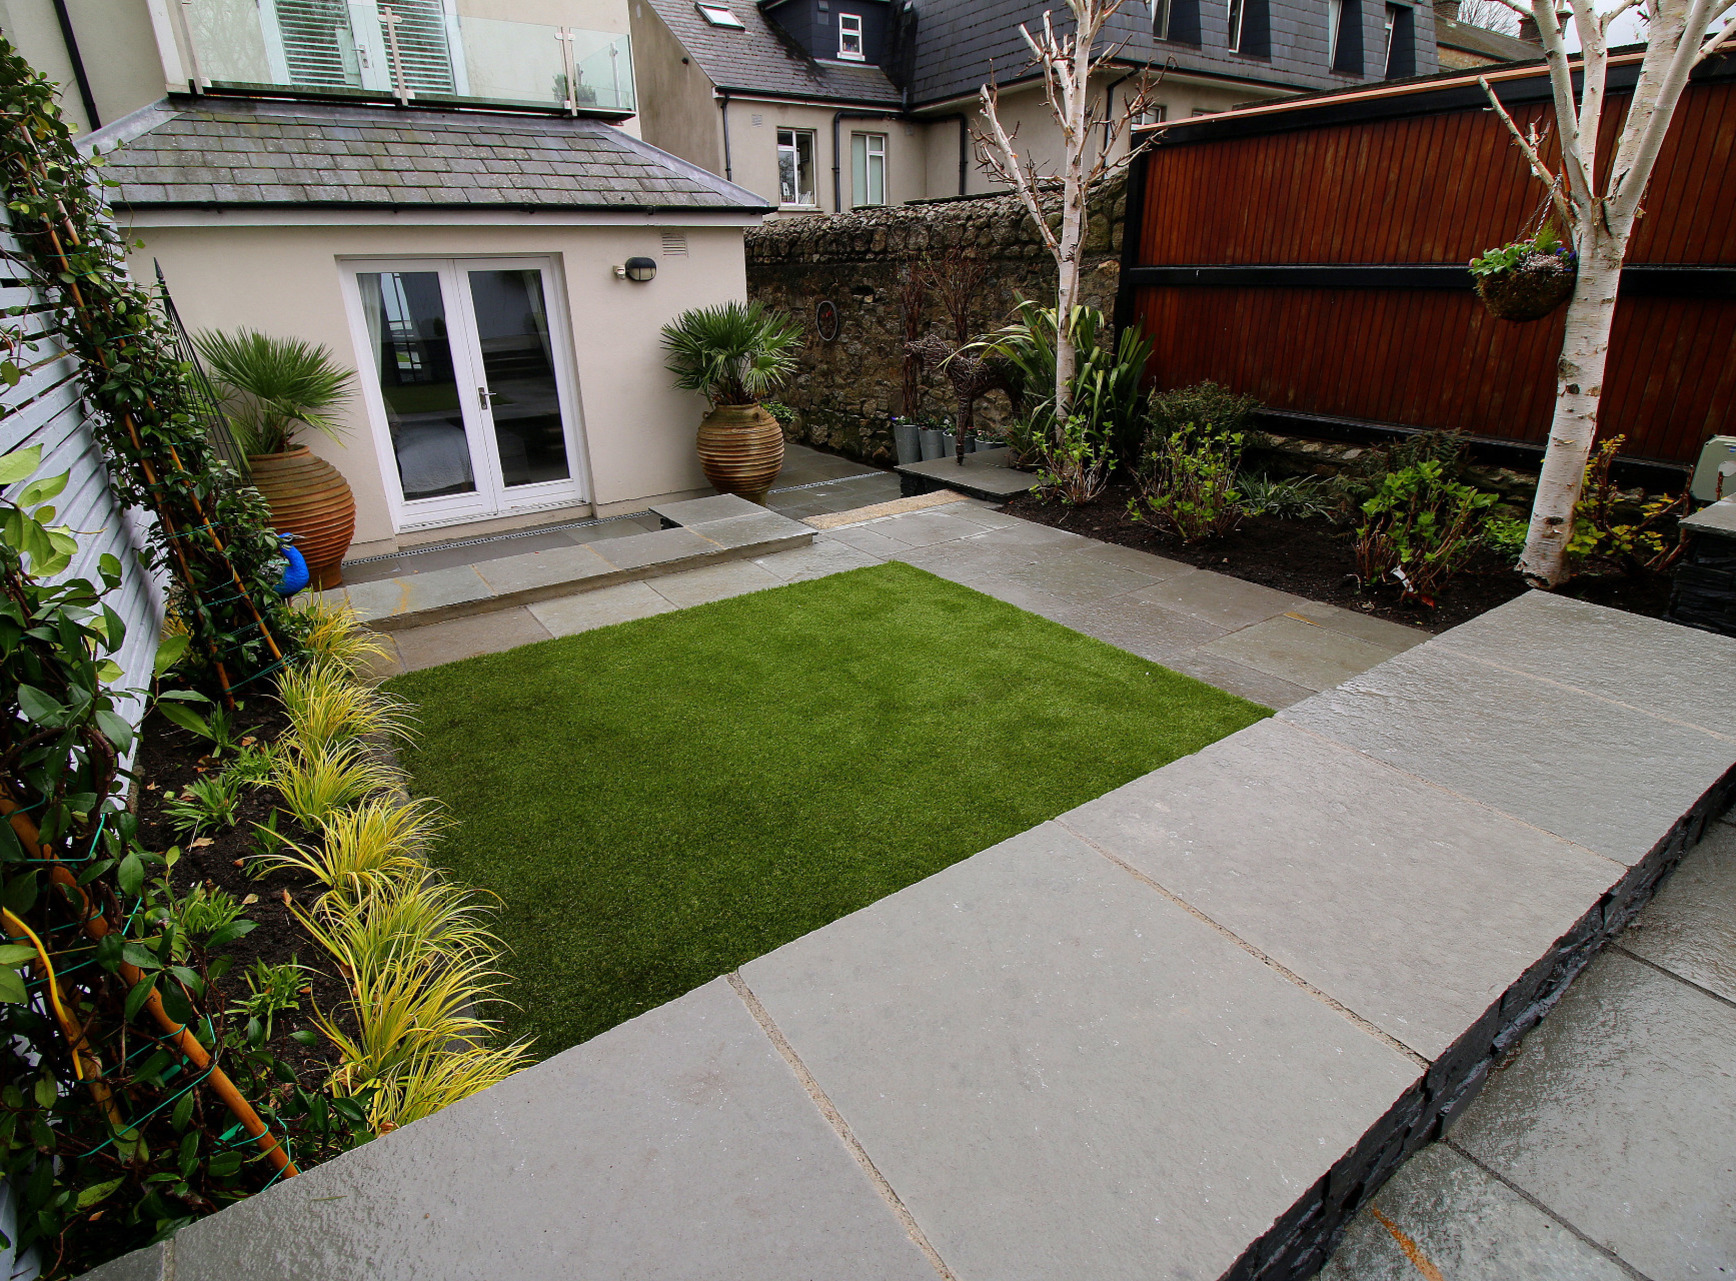 Rathmines garden featuring a terraced layout to lawn and patio spaces | Owen Chubb Garden Landscapers